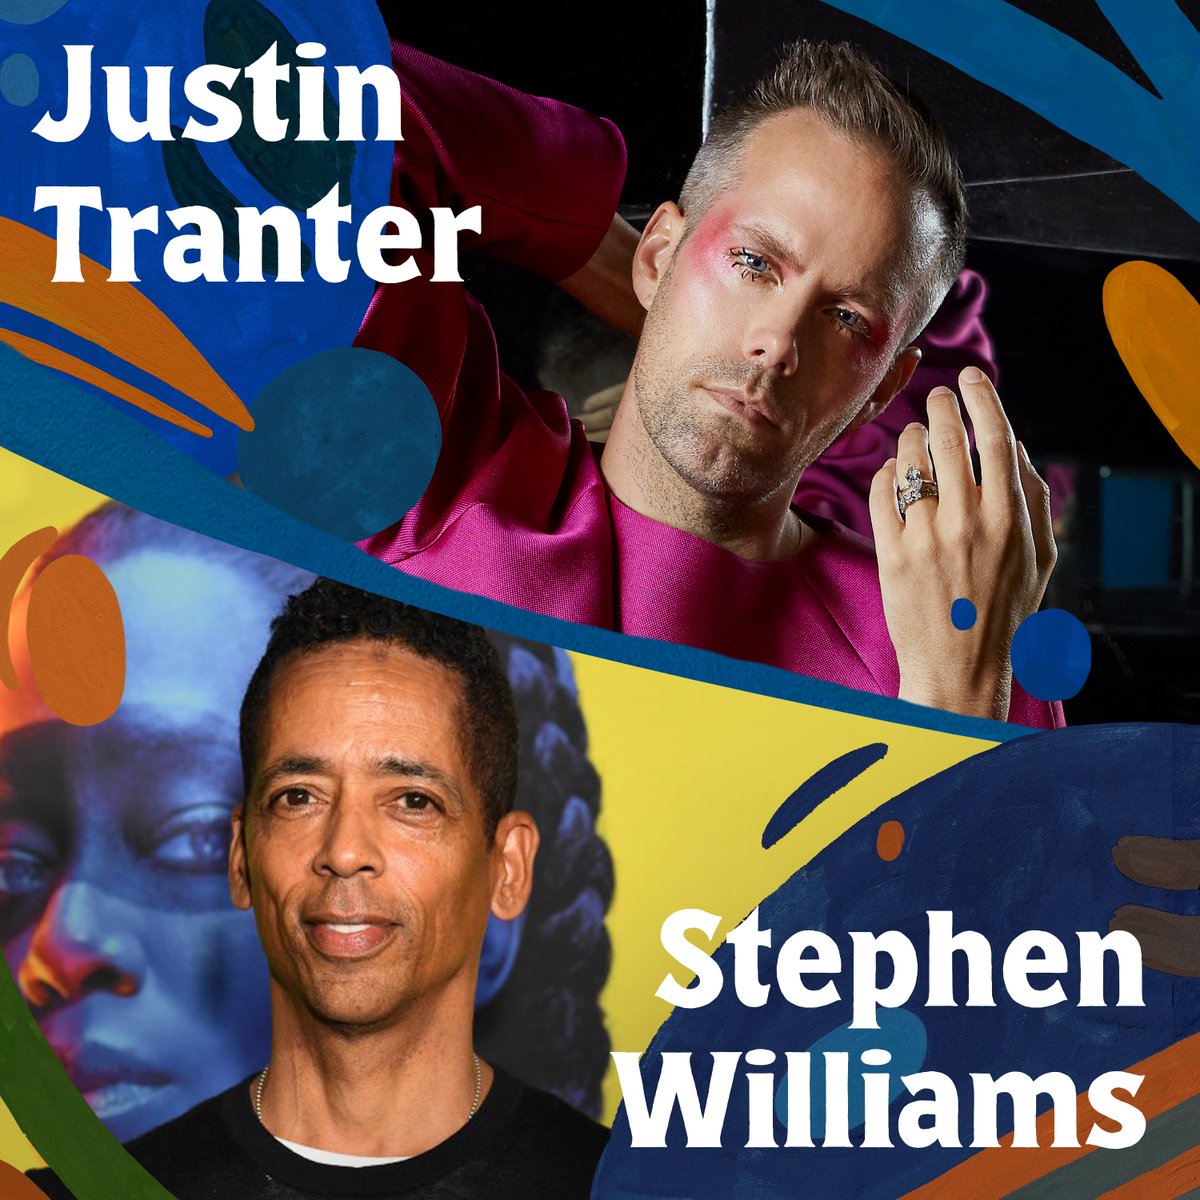 TODAY on Q with @tompowercbc: songwriter @justtranter | director Stephen Williams | link.chtbl.com/RniPnSsU